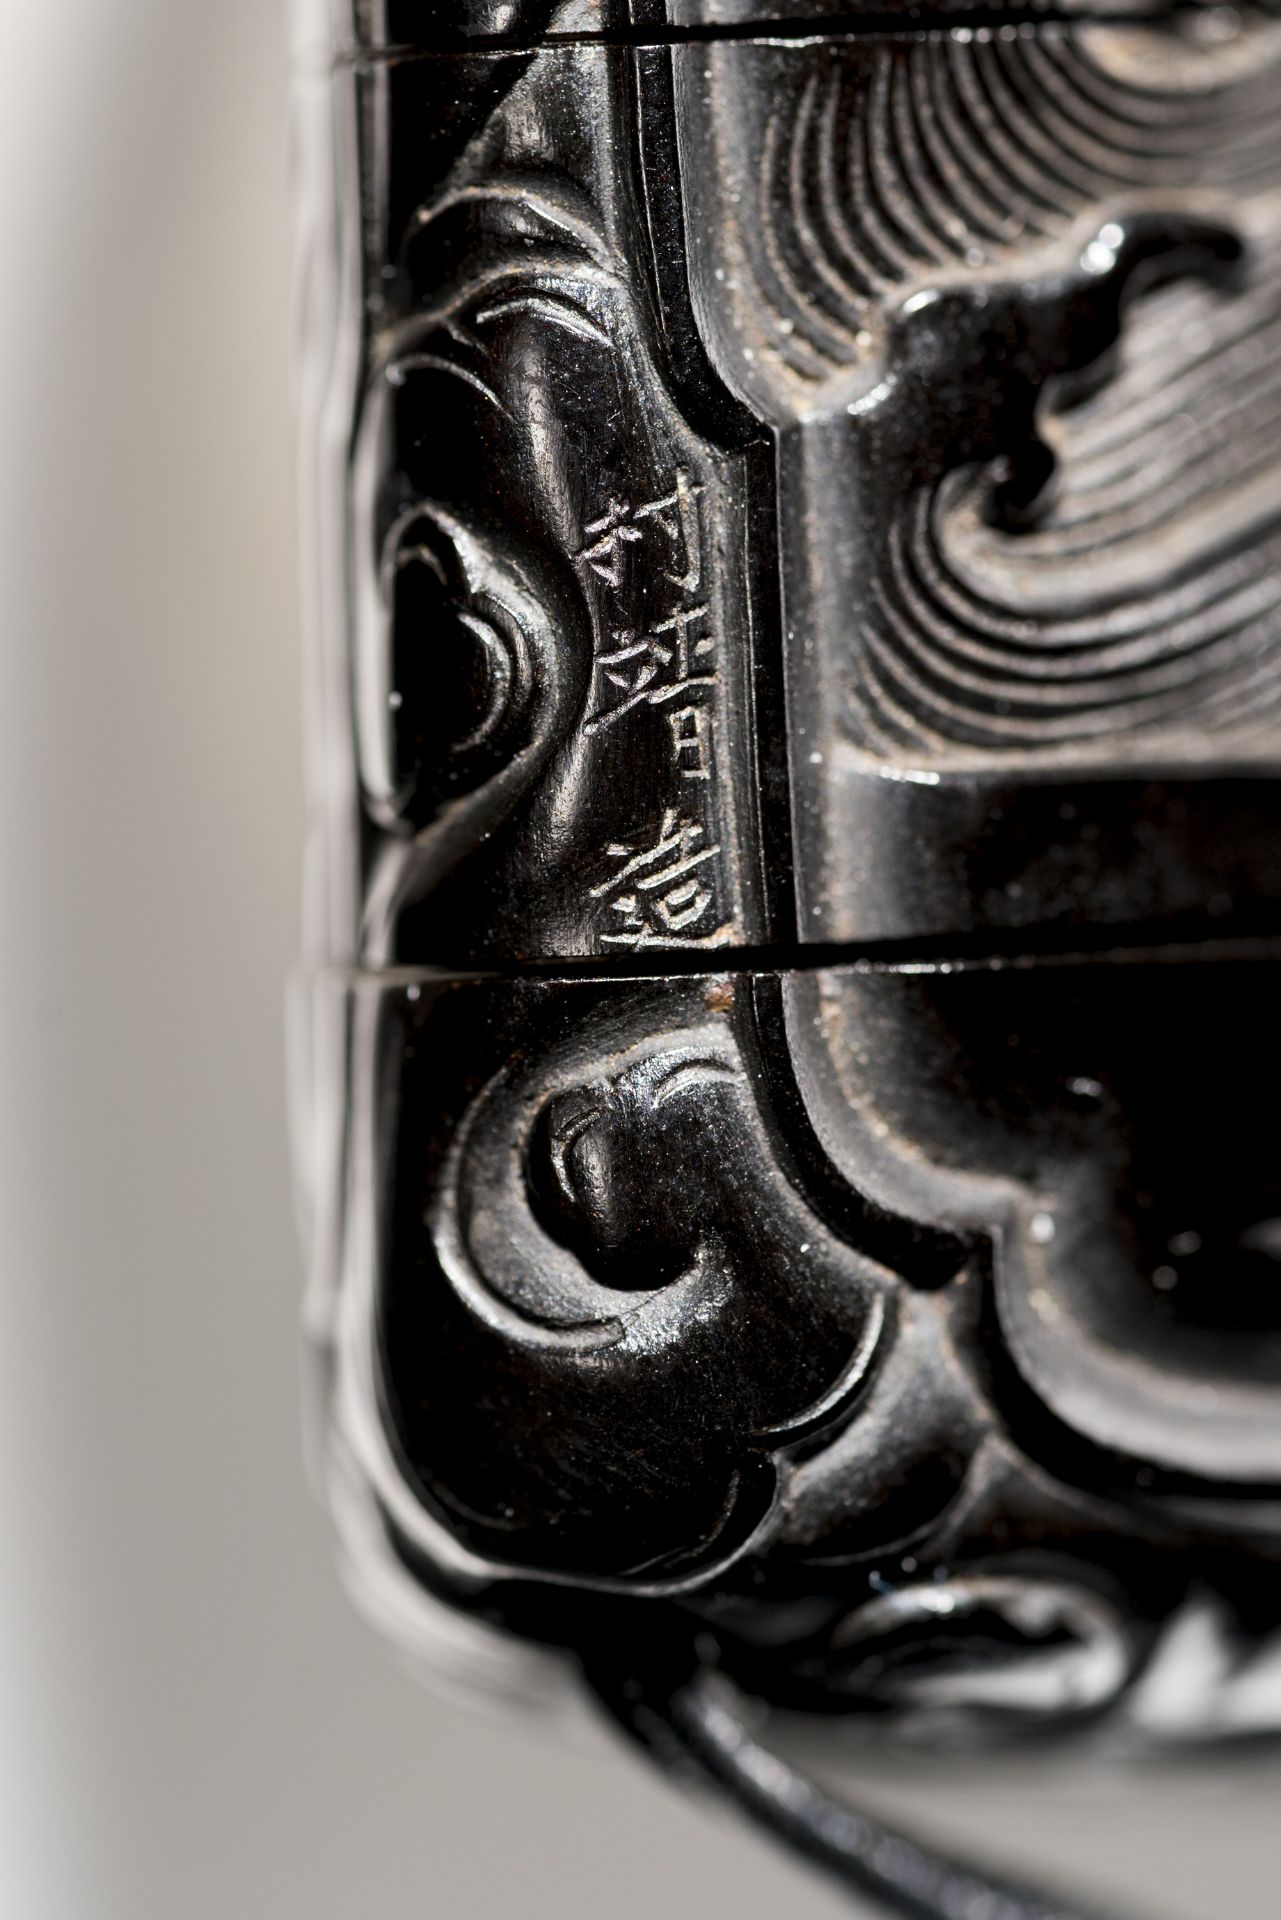 ZONSEI: A FINE TSUIKOKU (CARVED BLACK LACQUER) FOUR-CASE INRO DEPICTING CHORYO AND KOSEKIKO - Image 7 of 7